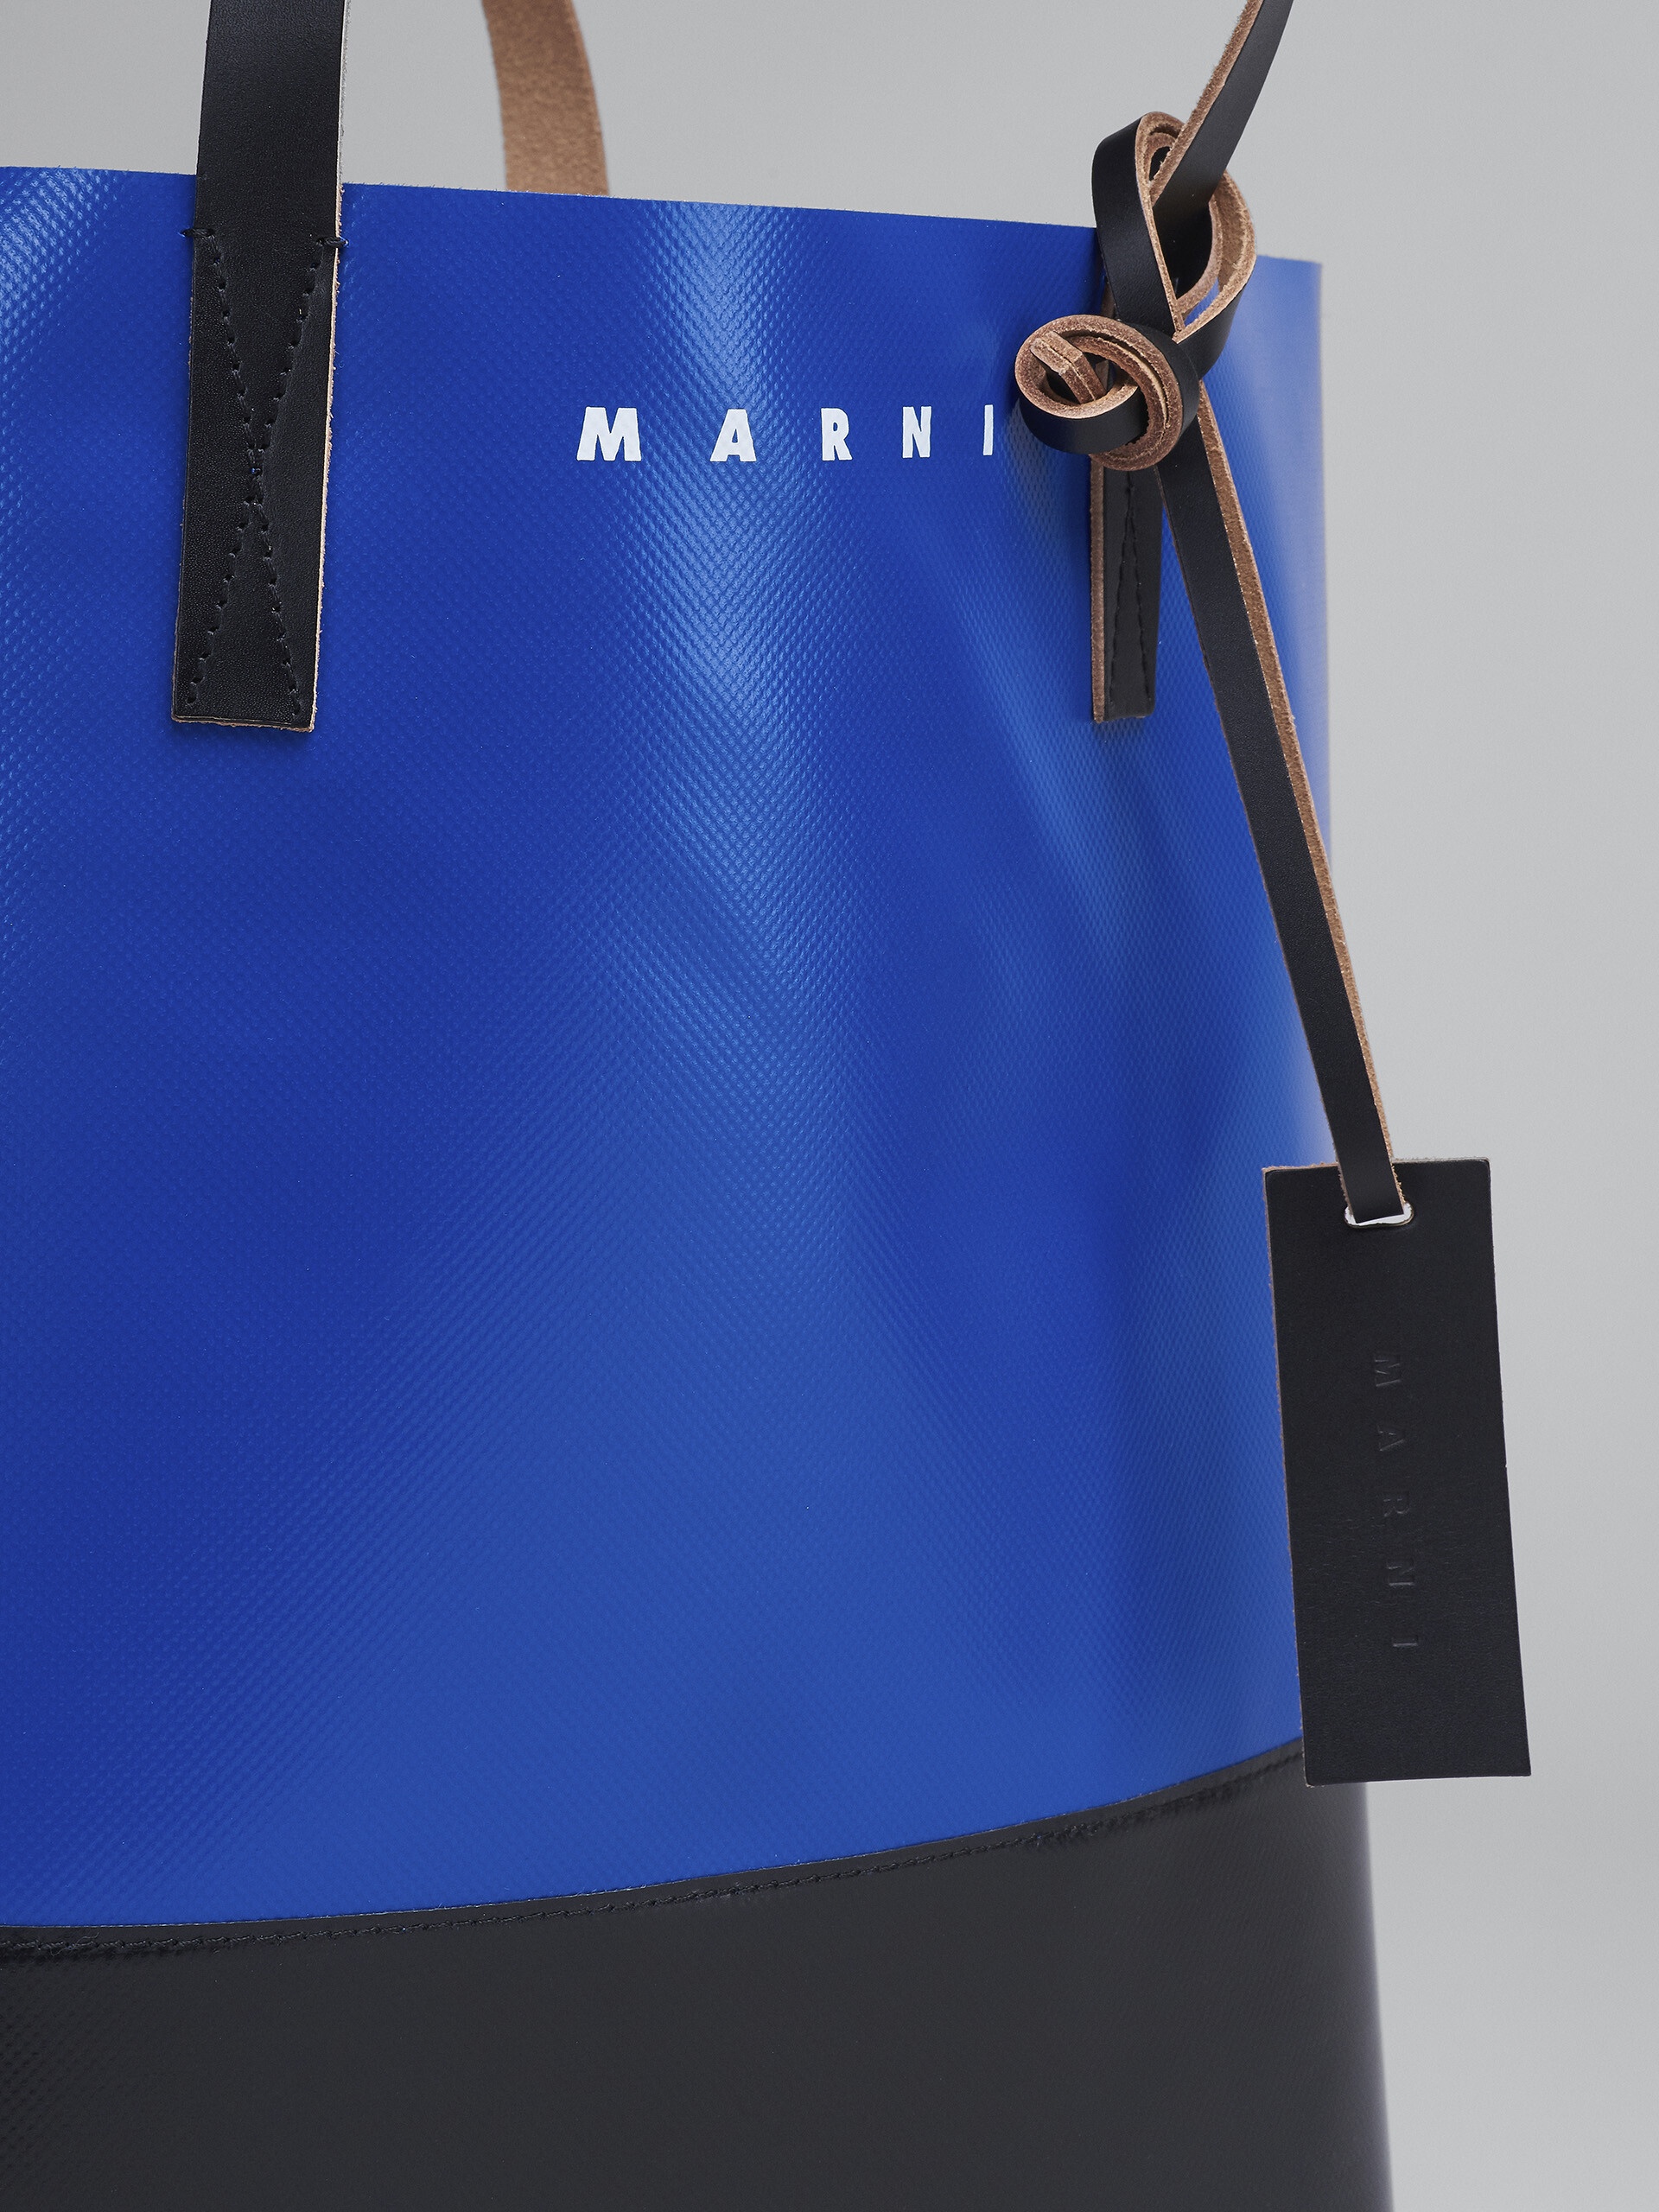 TRIBECA SHOPPING BAG IN BLUE AND BLACK - 5